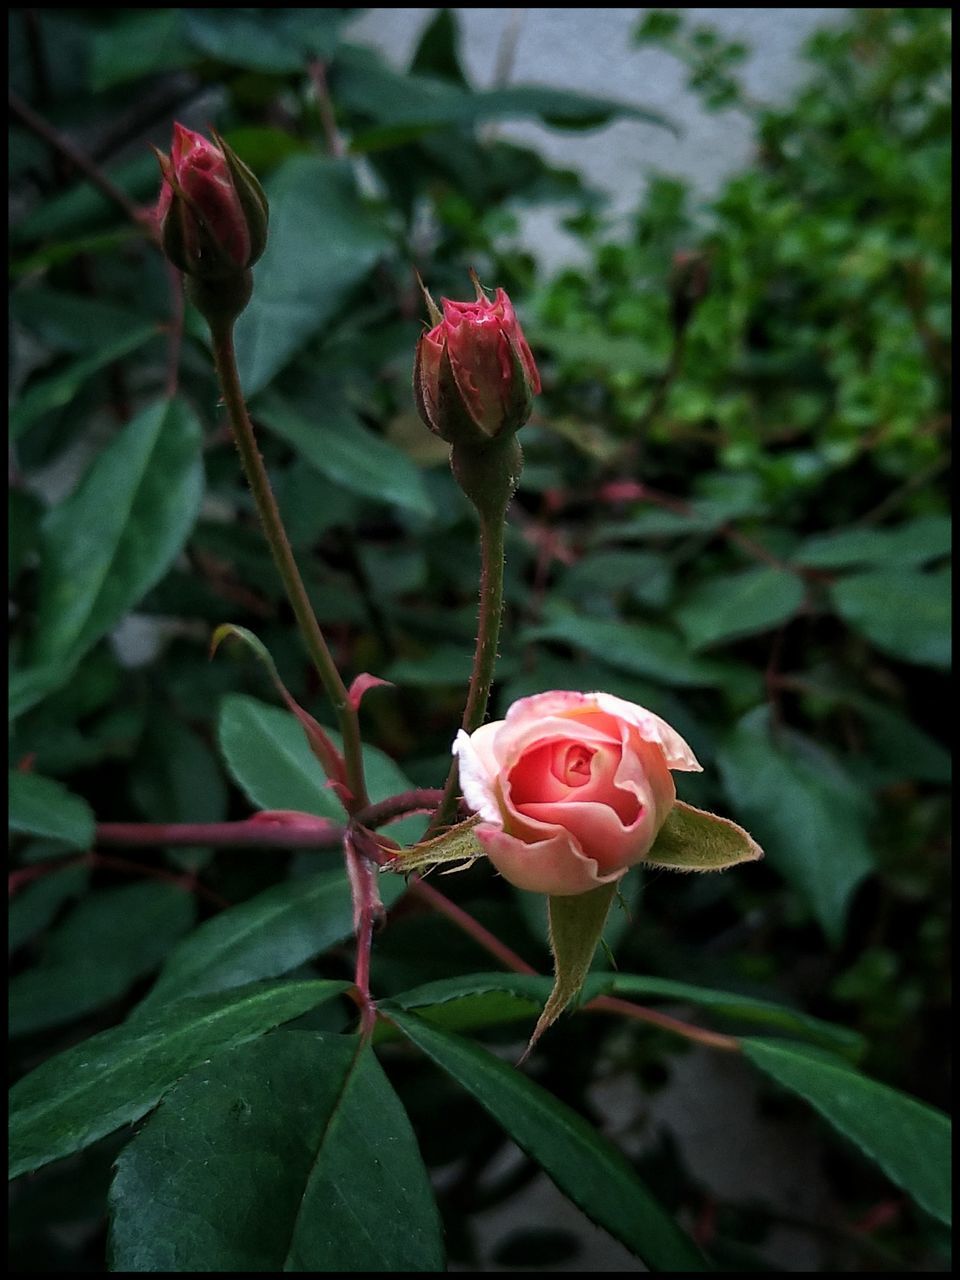 beauty in nature, plant, vulnerability, fragility, flower, flowering plant, growth, freshness, close-up, petal, flower head, inflorescence, nature, plant part, pink color, rose, leaf, plant stem, bud, rose - flower, no people, outdoors, sepal